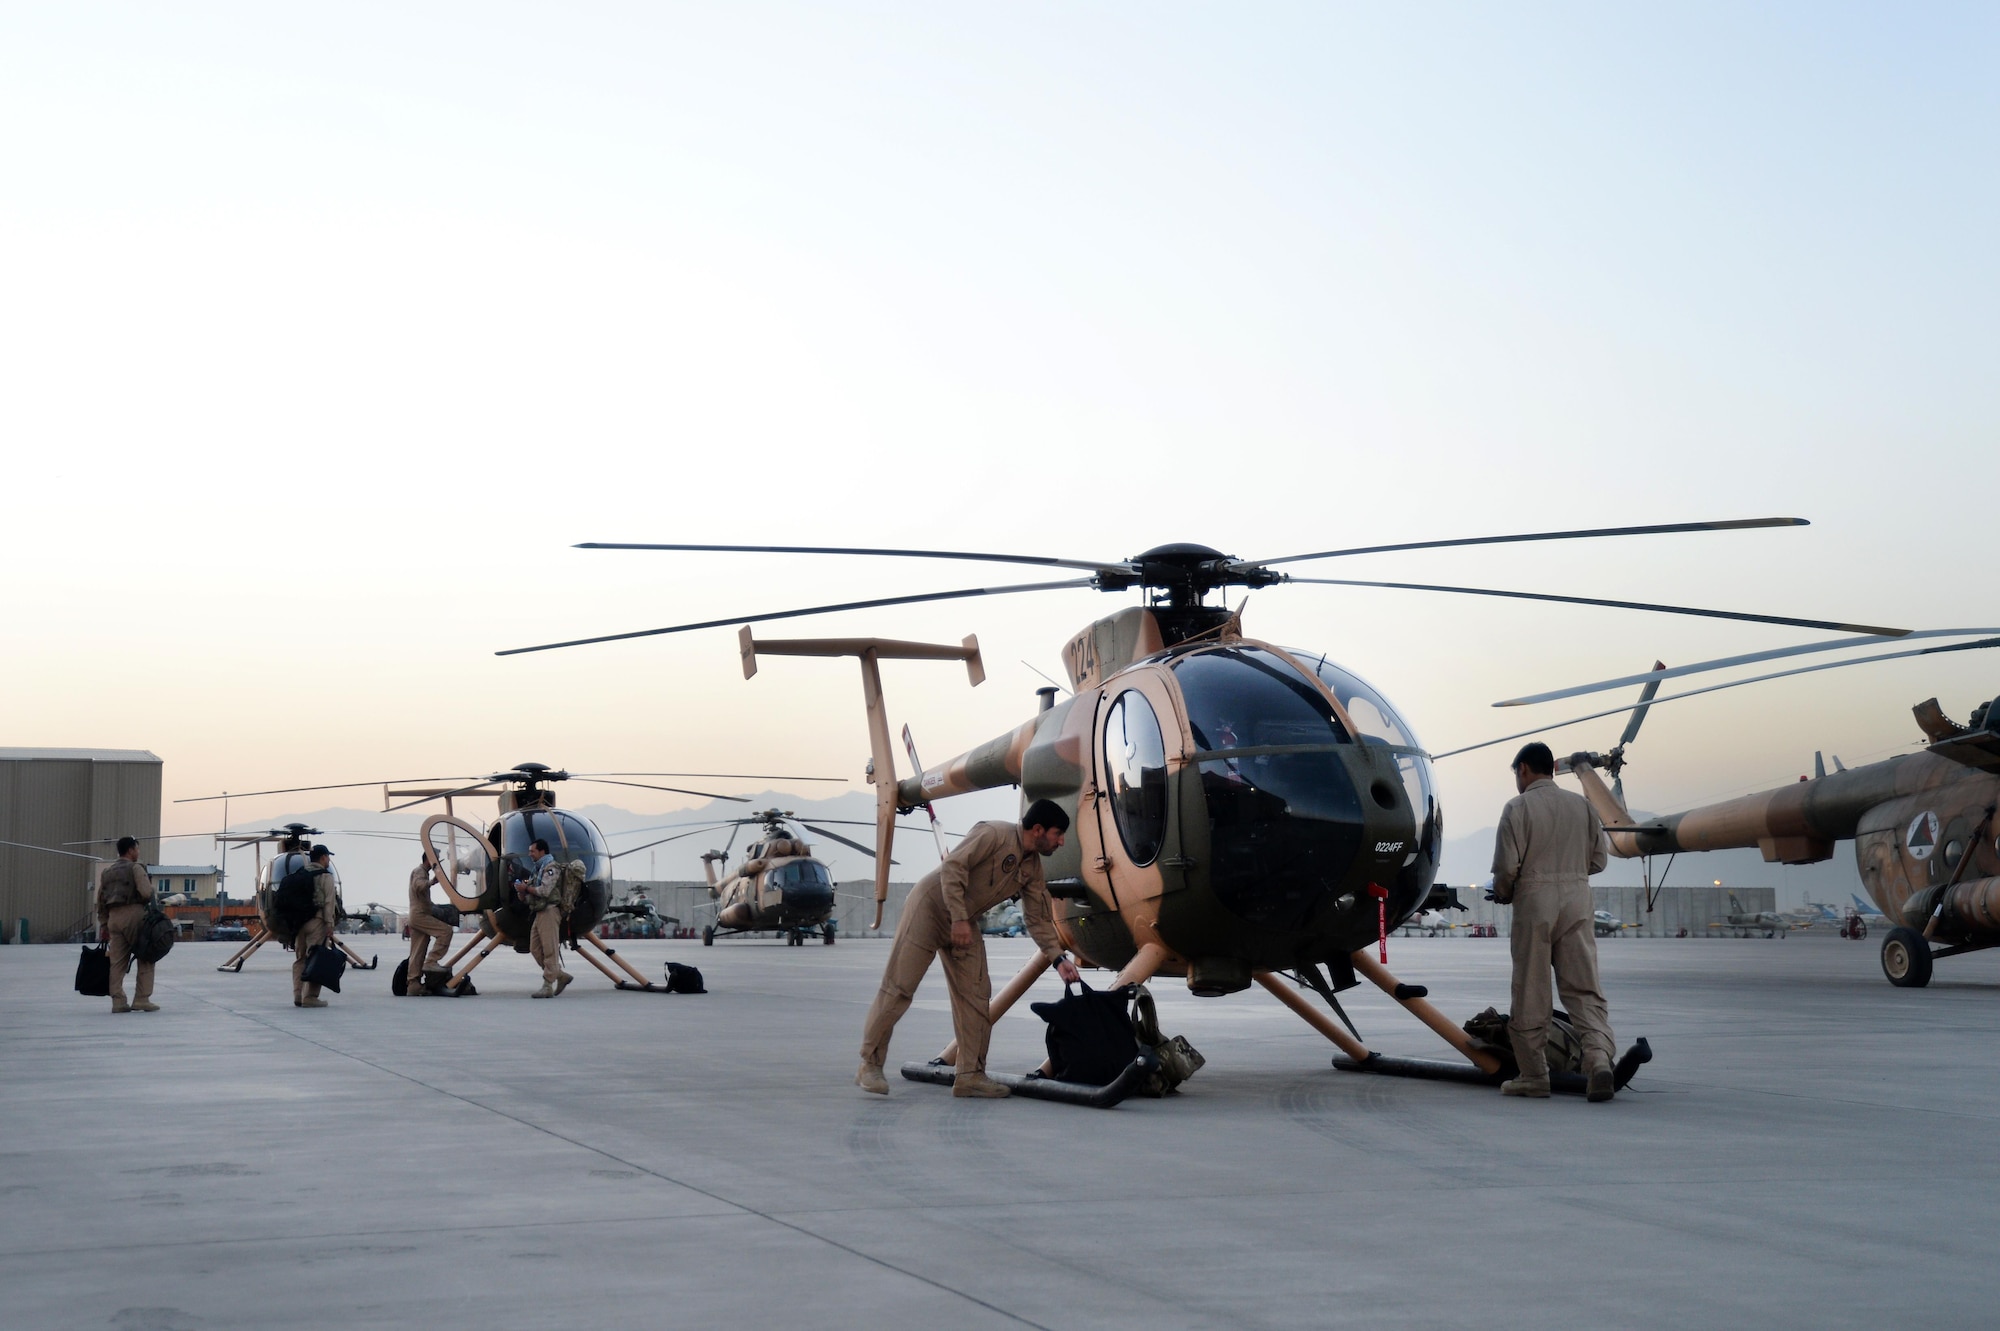 Afghan Air Force pilots perform pre-flight inspections prior to an all-Afghan combat mission. The crews flew out of Hamid Karzai International Airport, Kabul, Afghanistan, Sept. 27, 2015. (U.S. Air Force photo by Staff Sgt. Sandra Welch/released)